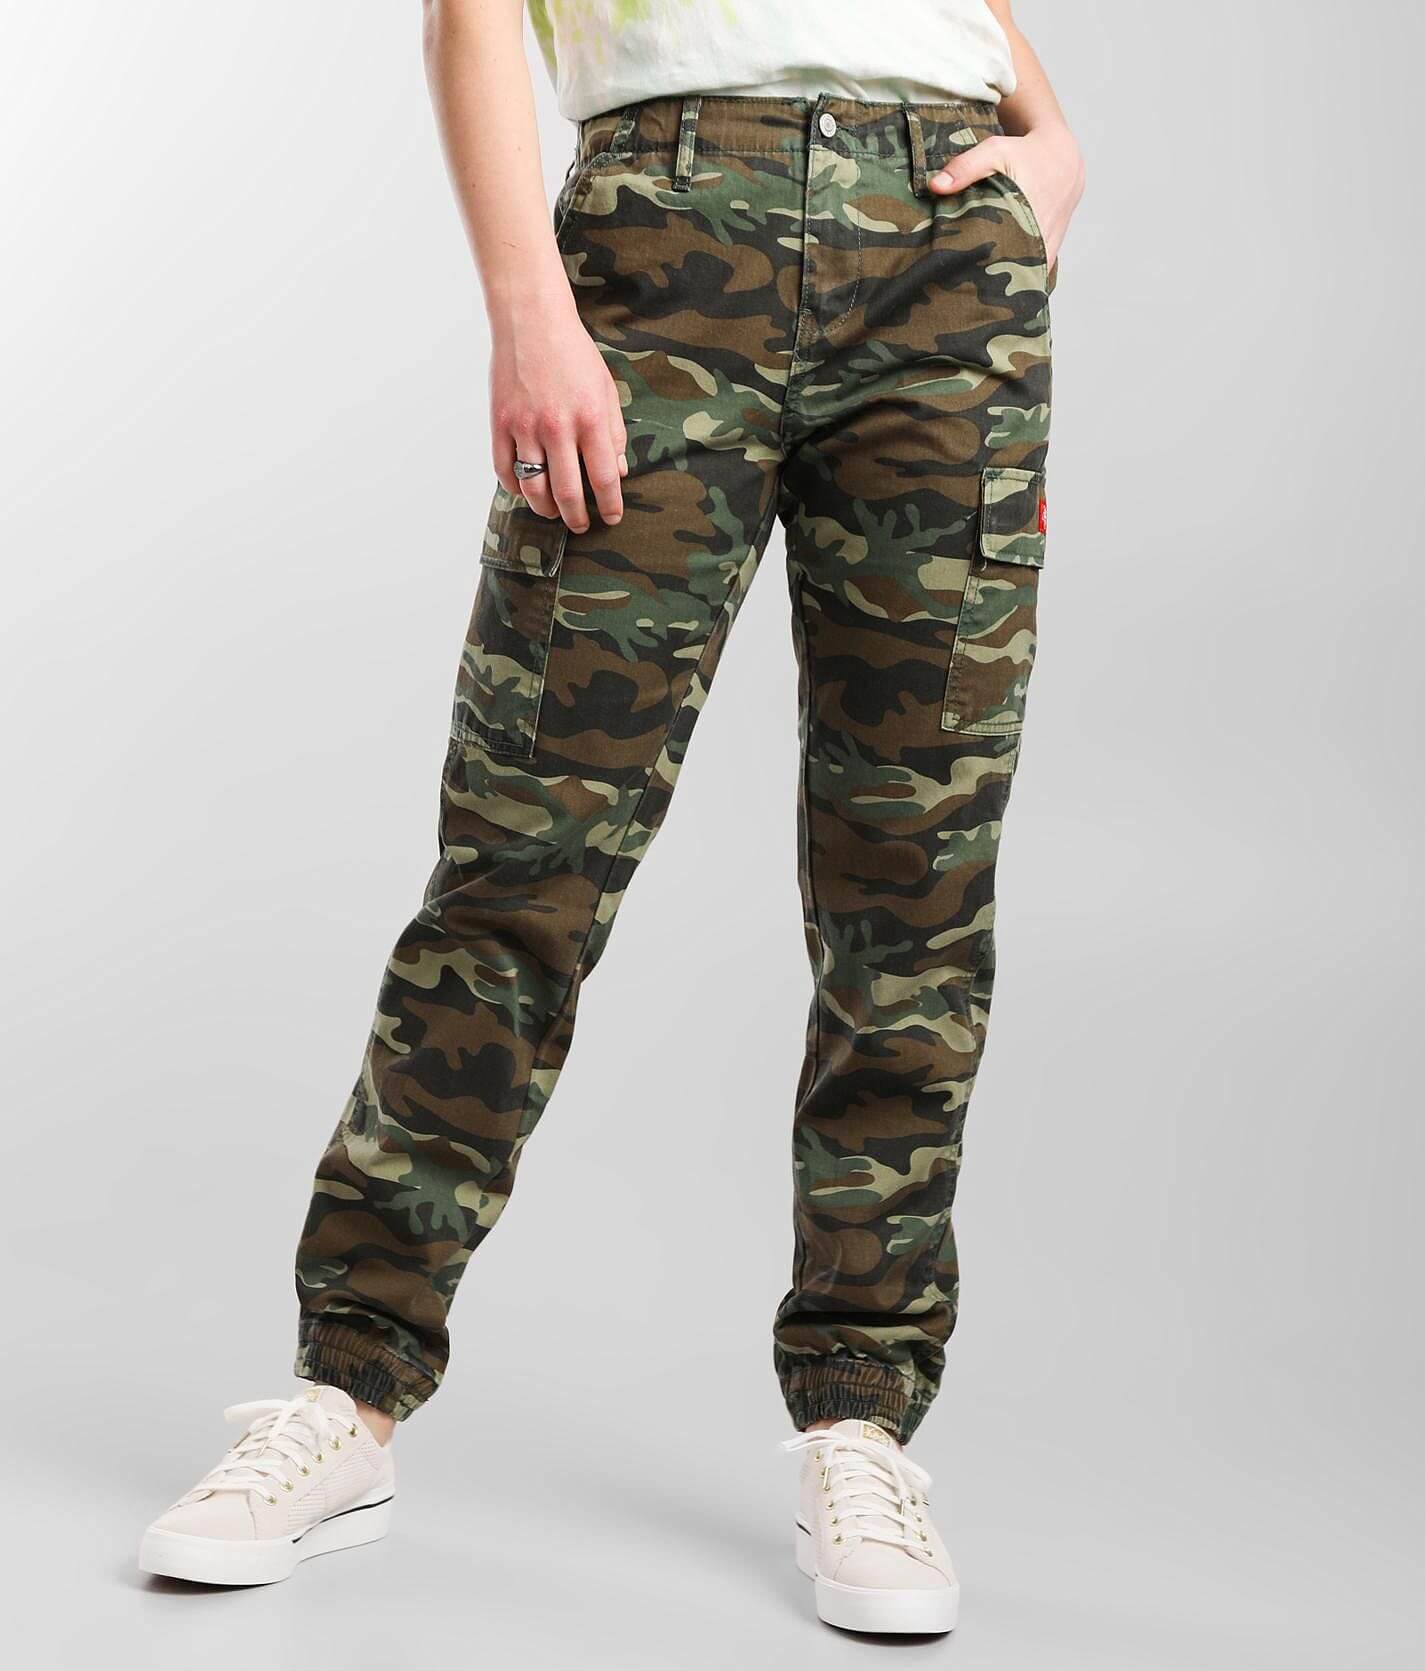 Dickies® Camo Cargo Utility Jogger Pant - Pants in Olive Camo | Buckle